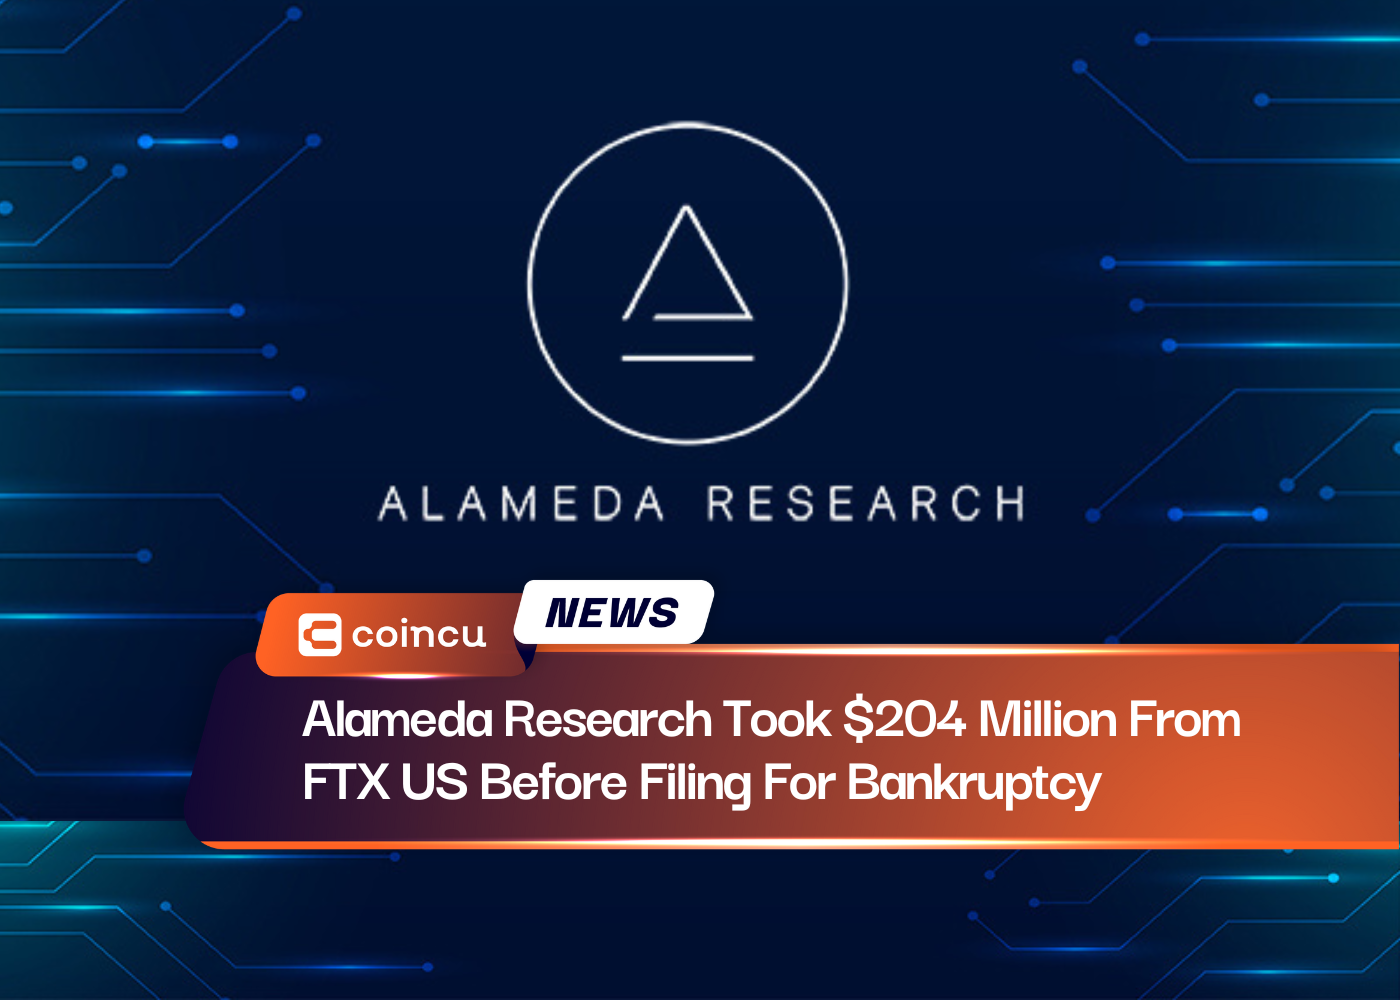 Alameda Research Took $204 Million From FTX US Before Filing For Bankruptcy